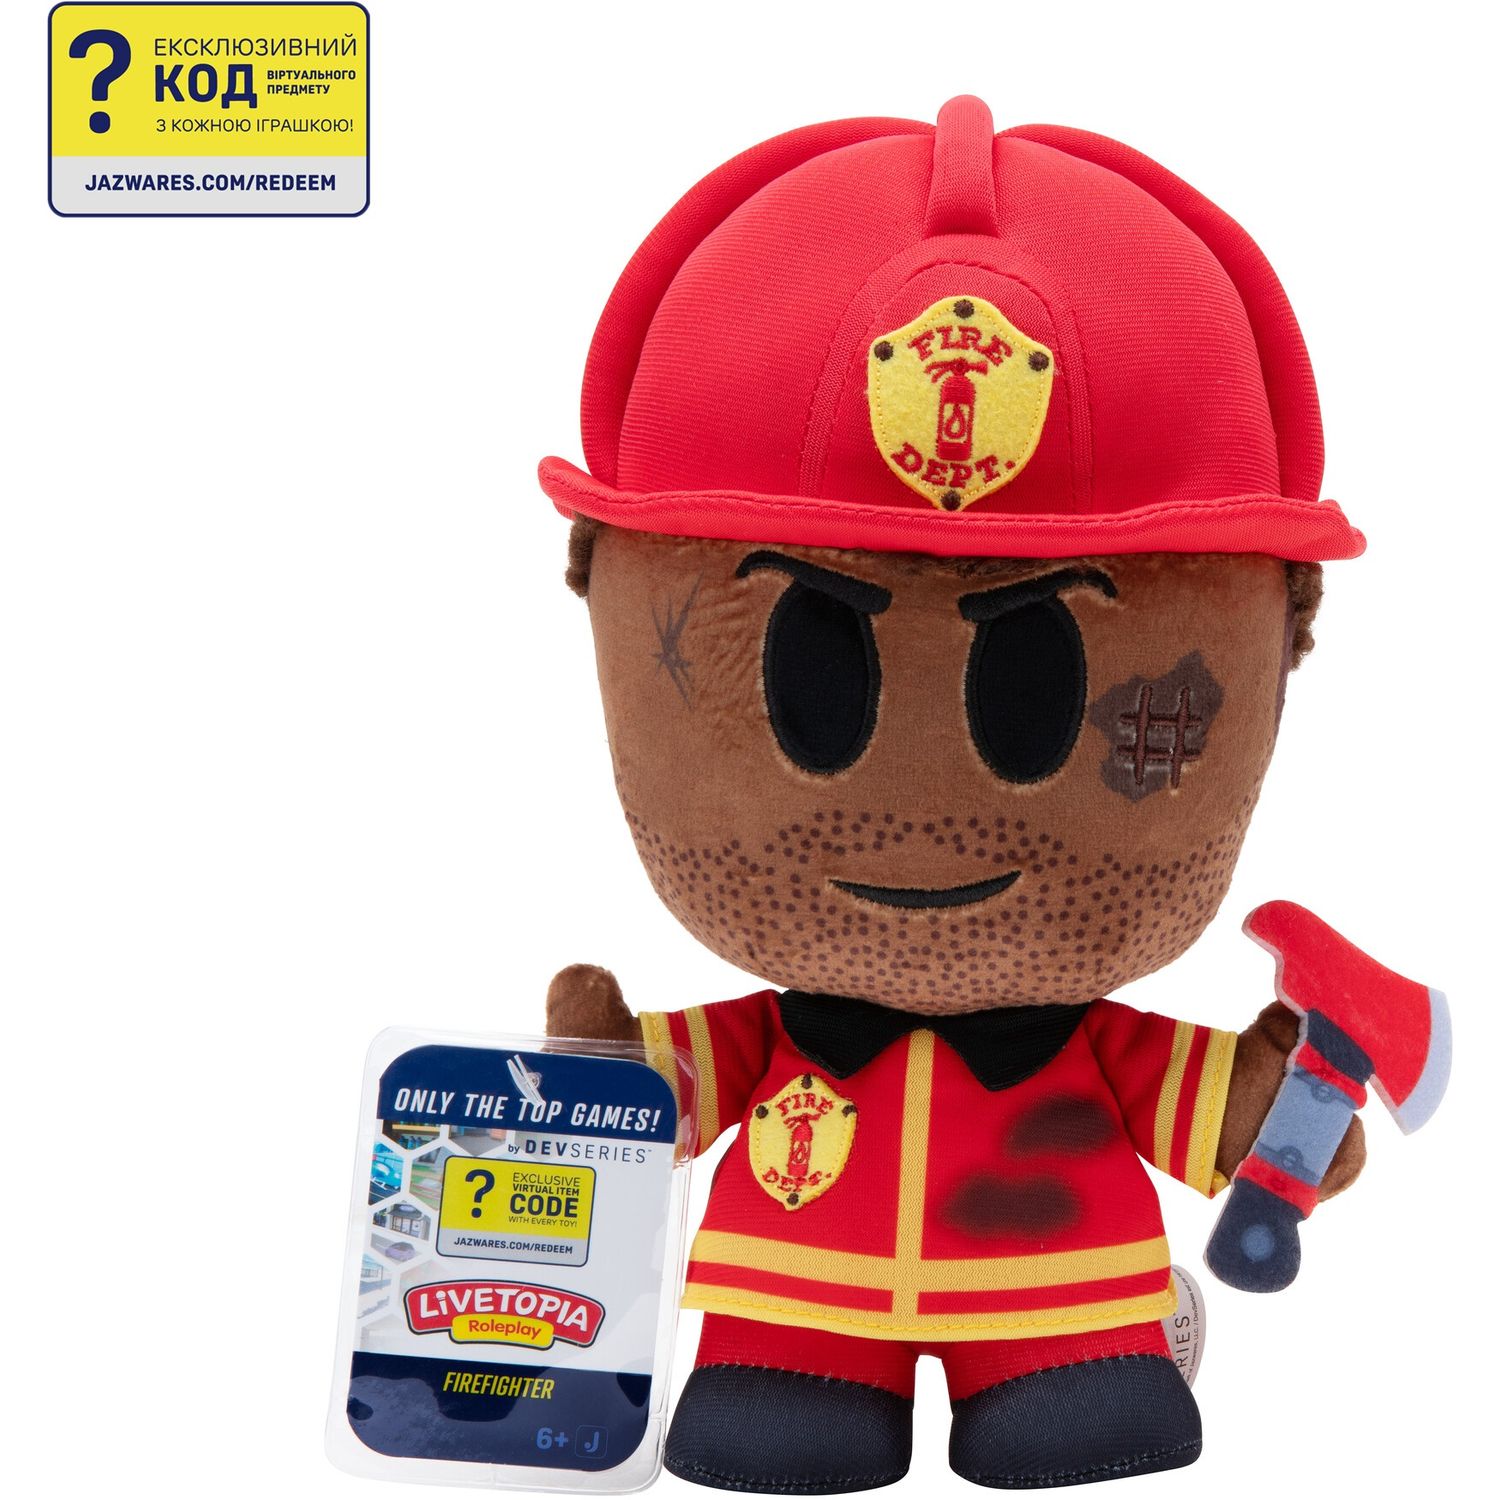 Мягкая игрушка DevSeries Collector Plush Livetopia: Firefighter (CRS0014) - фото 1